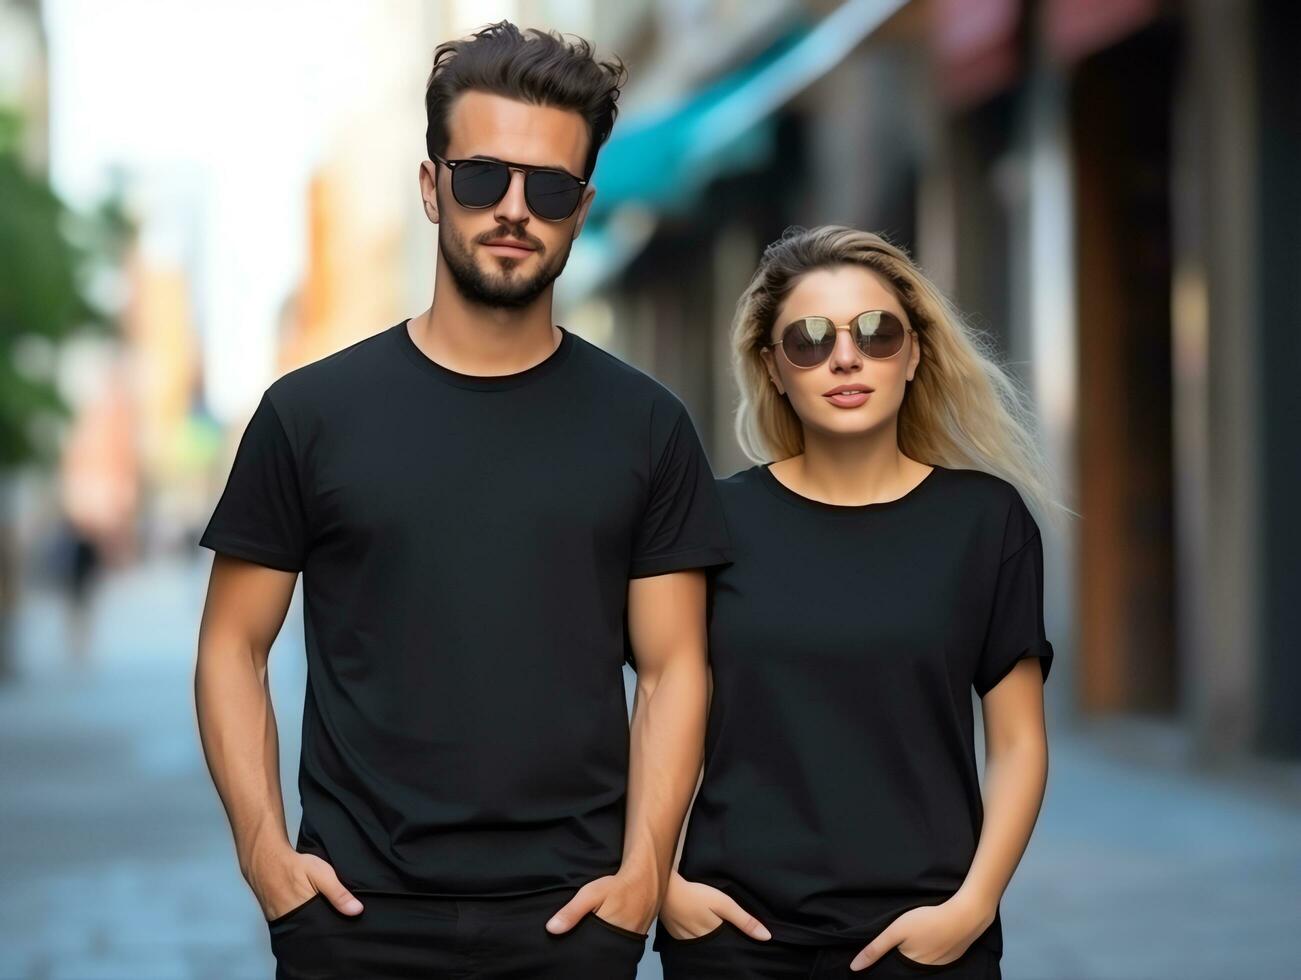 A couple boyfriend and girlfriend wearing blank black matching t-shirts mockup for design template photo